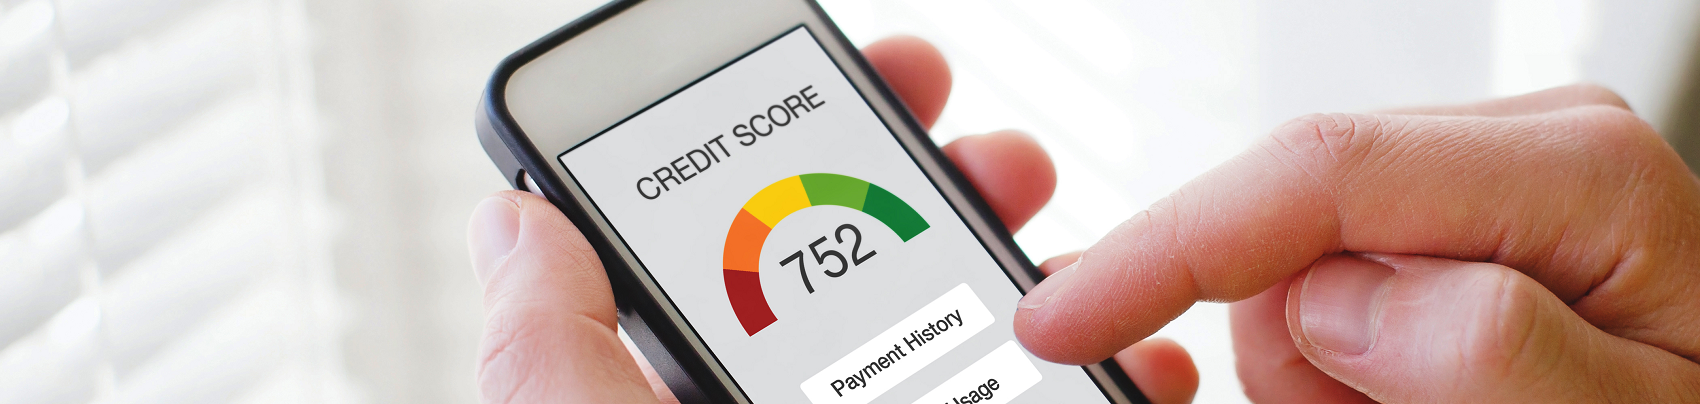 How Does My Credit Score Affect My Loan